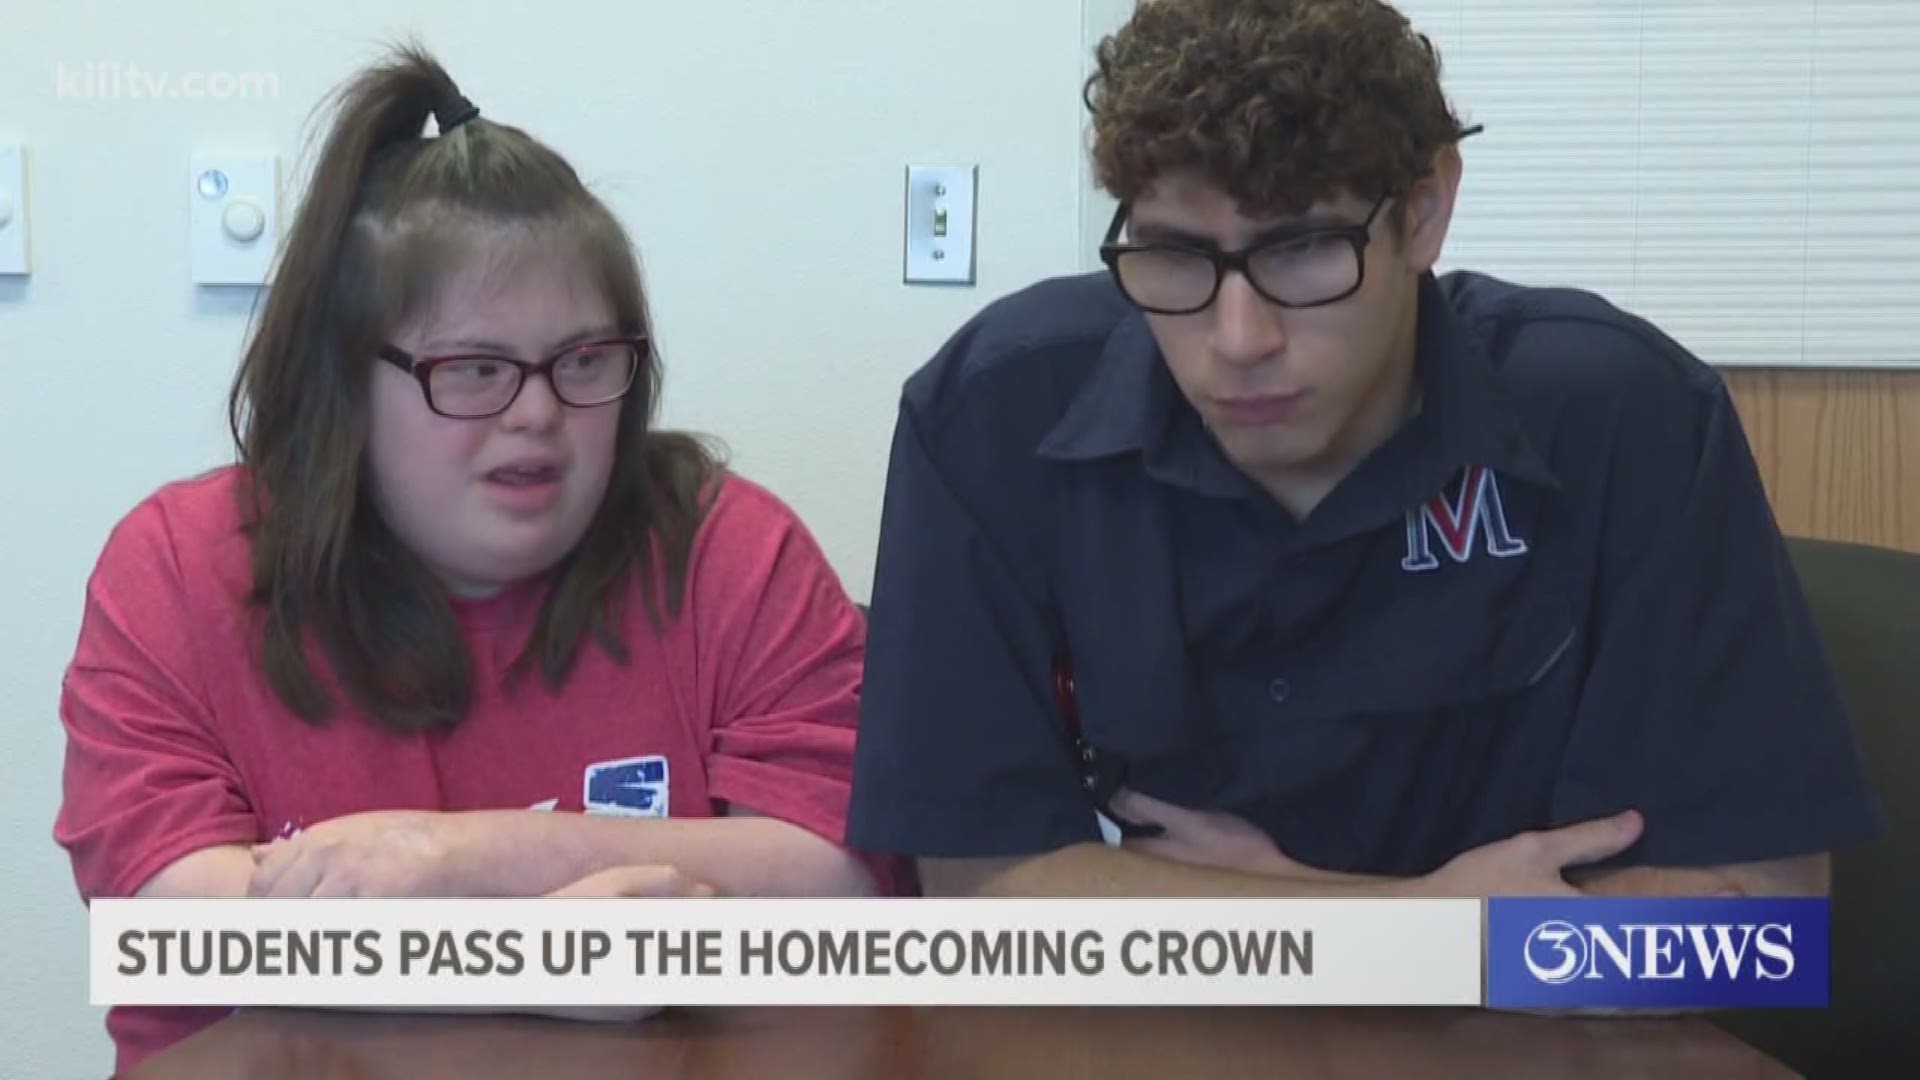 These students surprised their peers during the homecoming football game